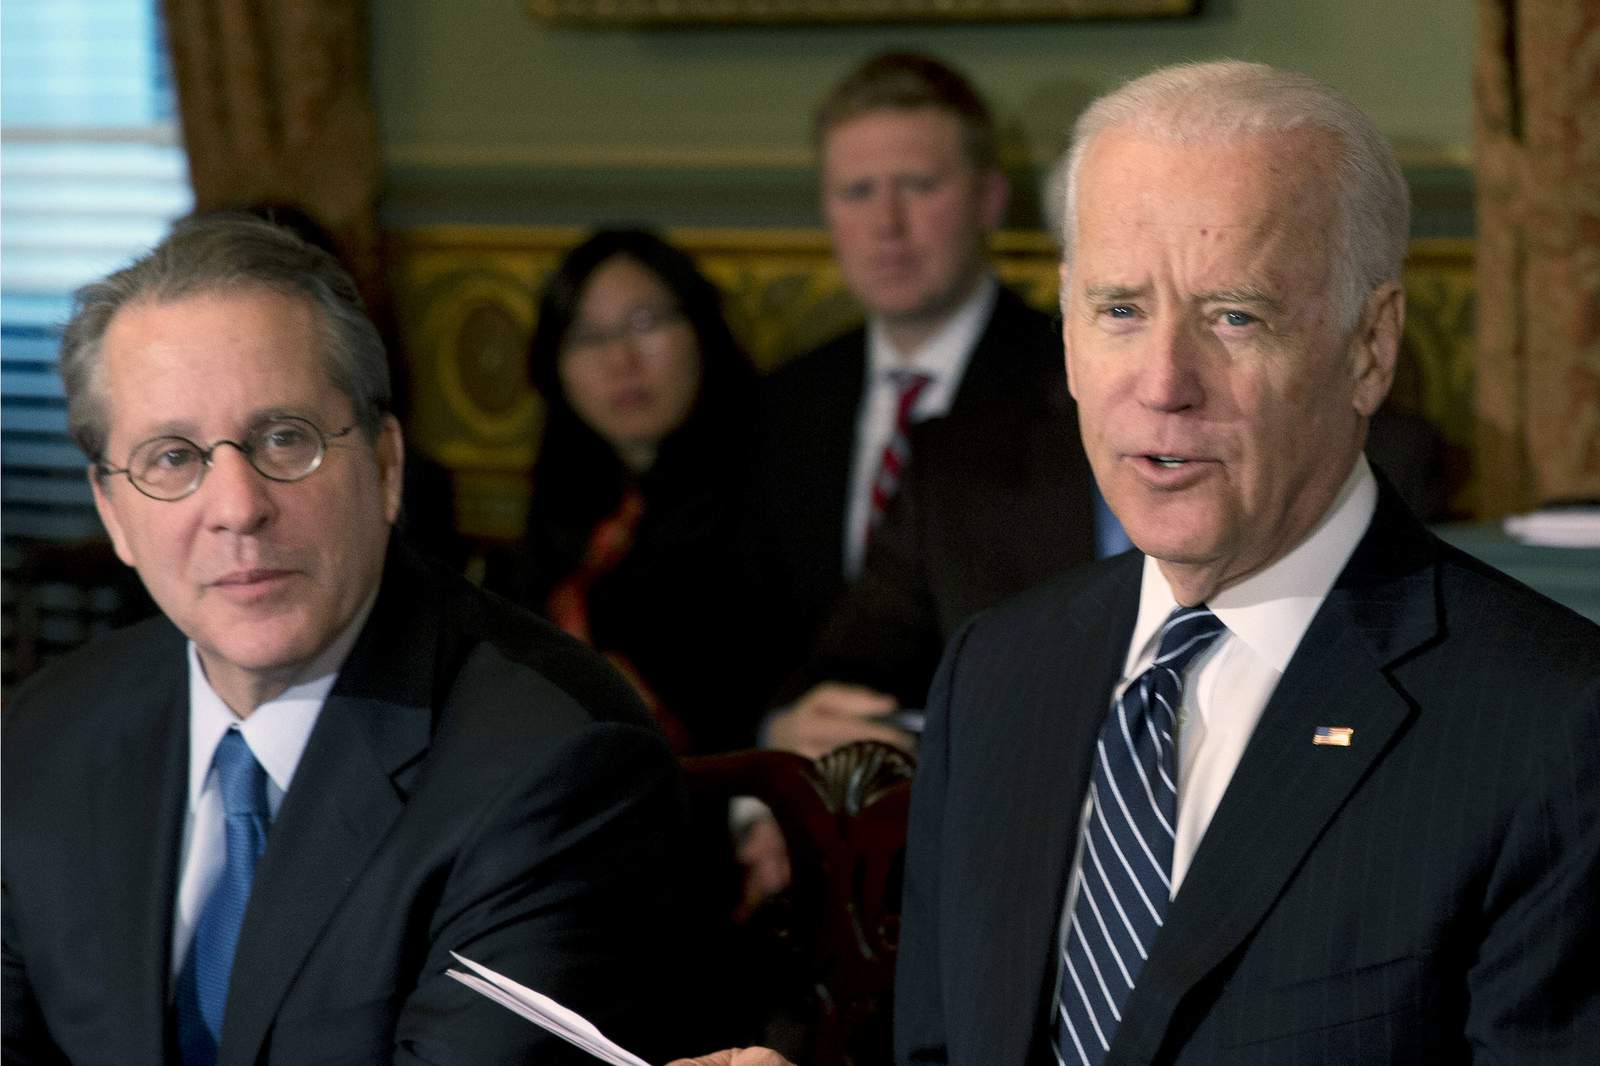 Biden taps Gene Sperling to oversee COVID-19 relief package